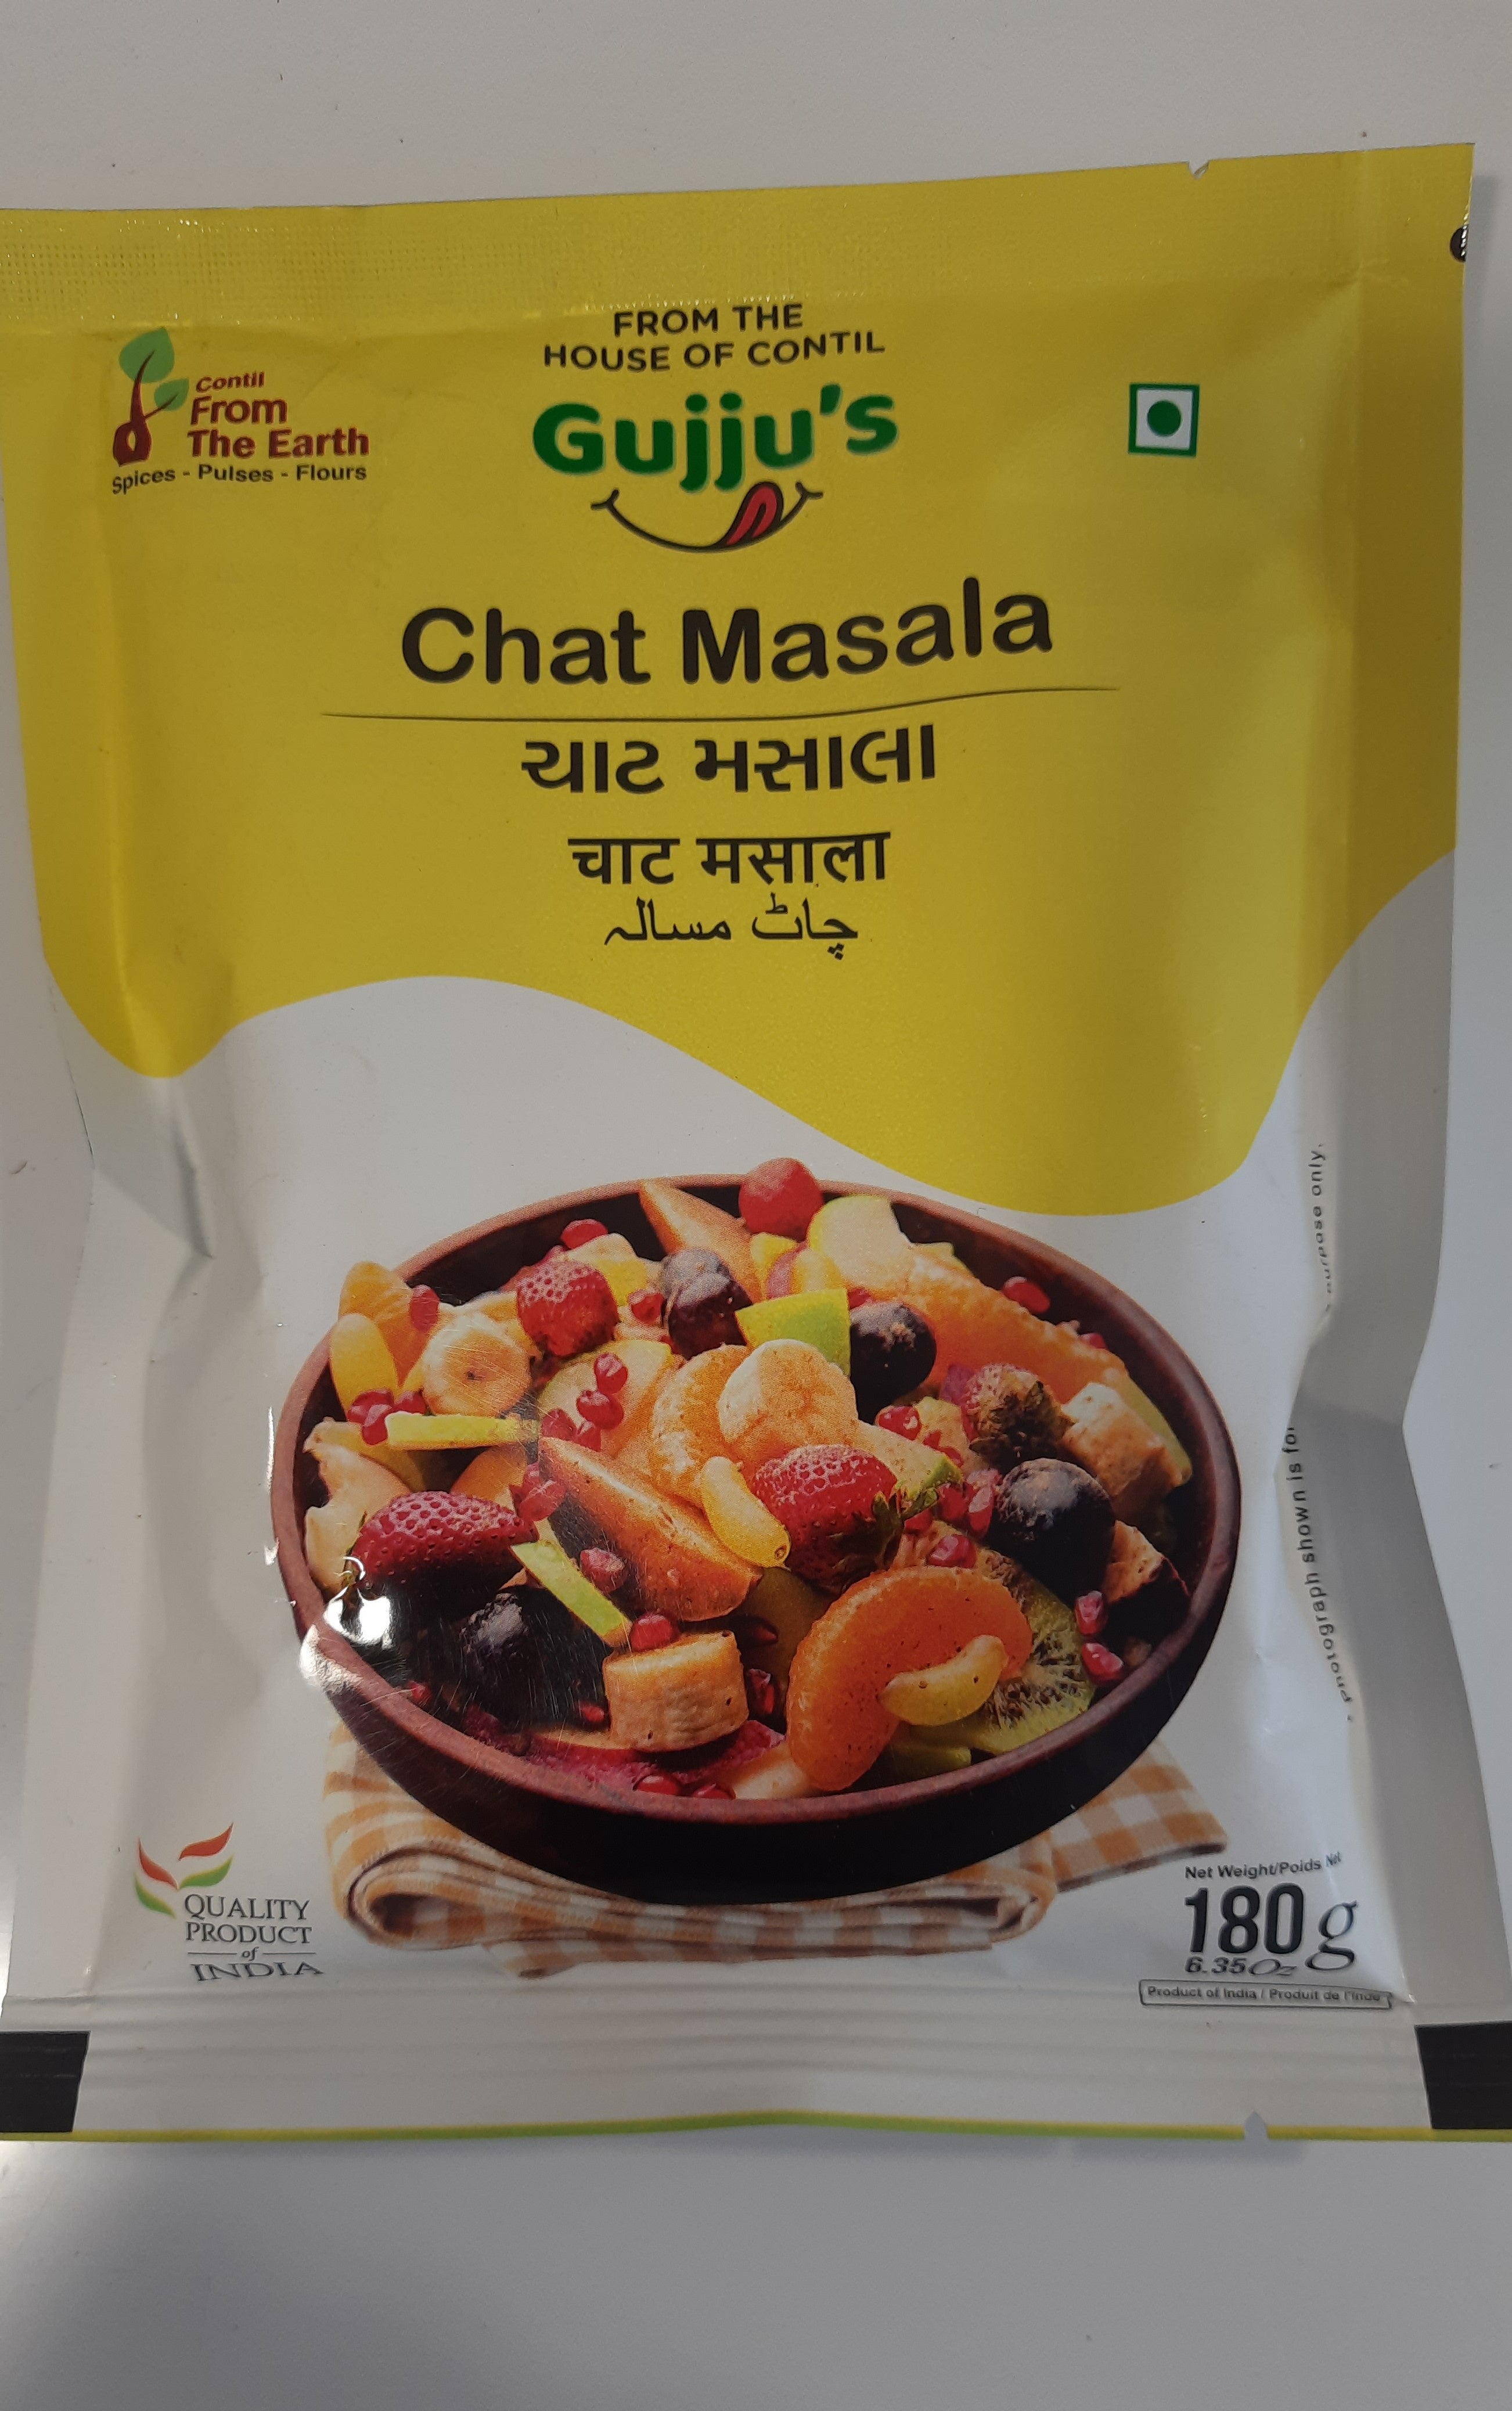 From the Earth - Chaat Masala 180g